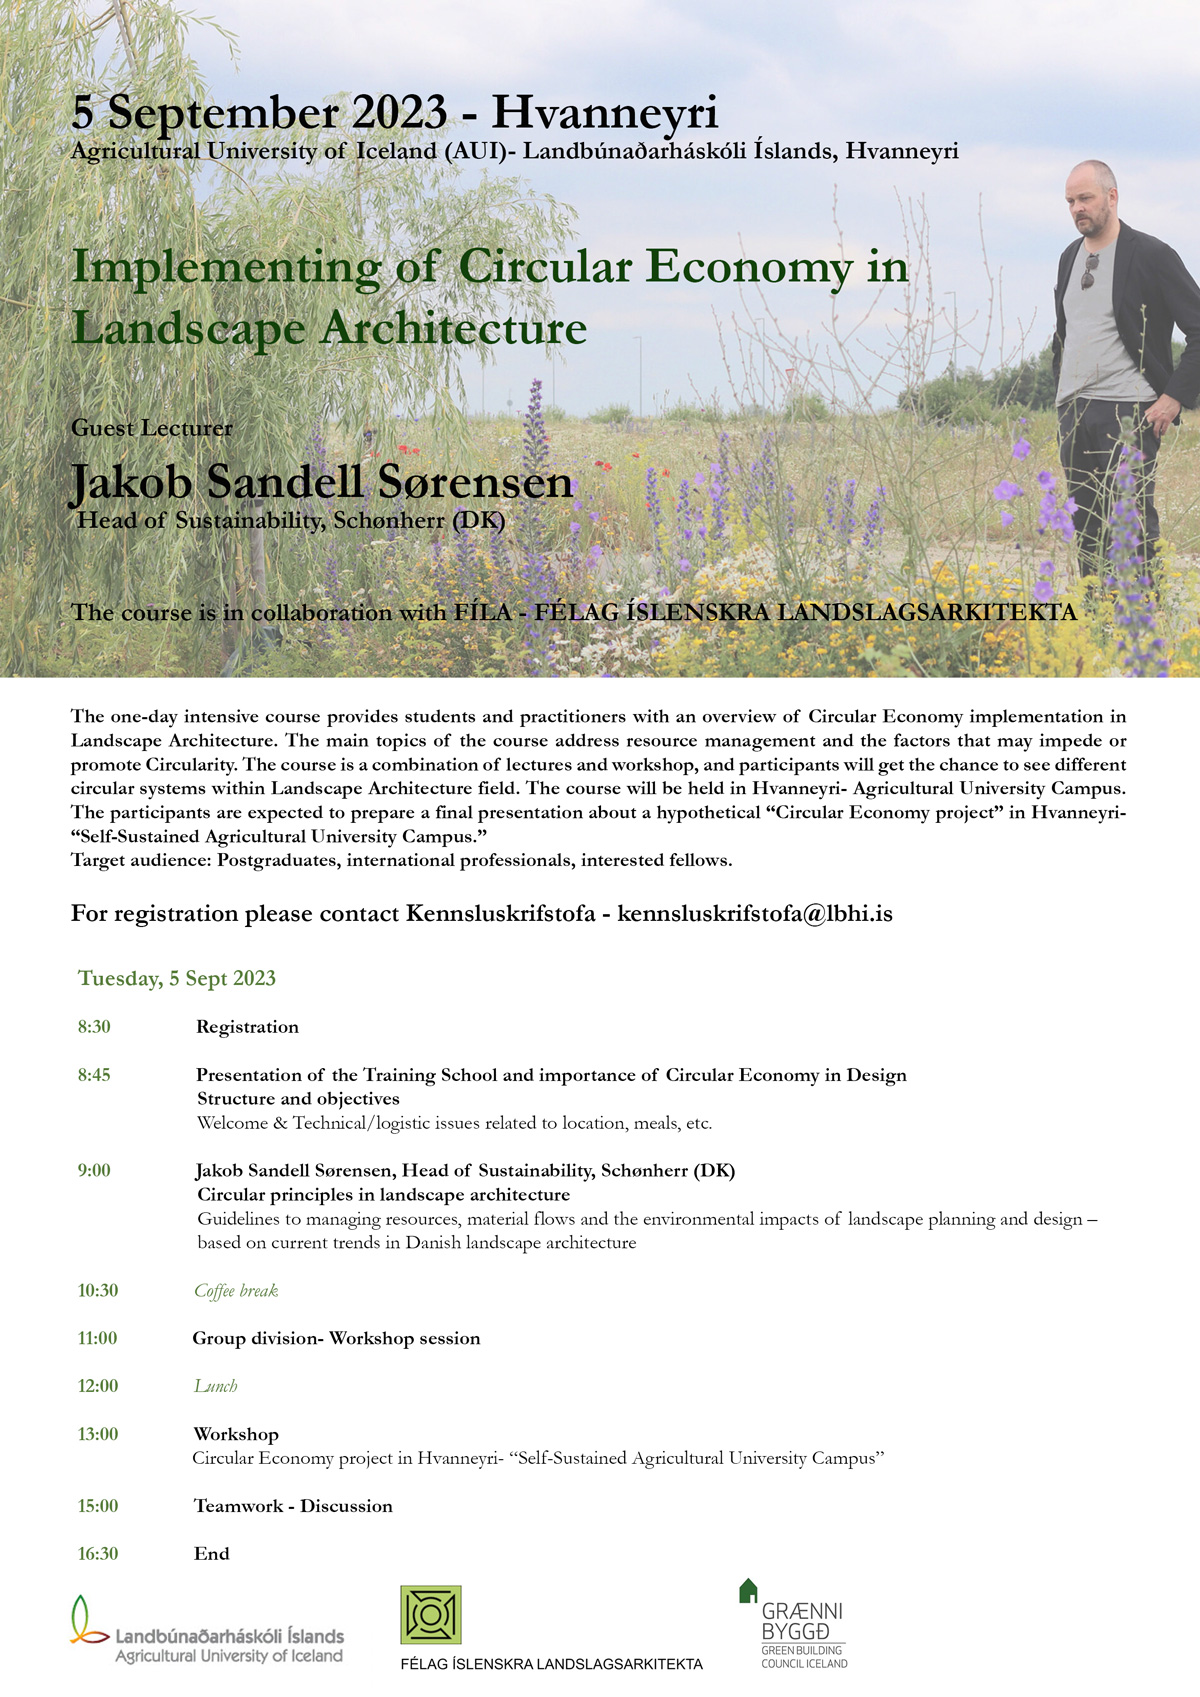 Open workshop on implimenting circular economy in landscape architecture